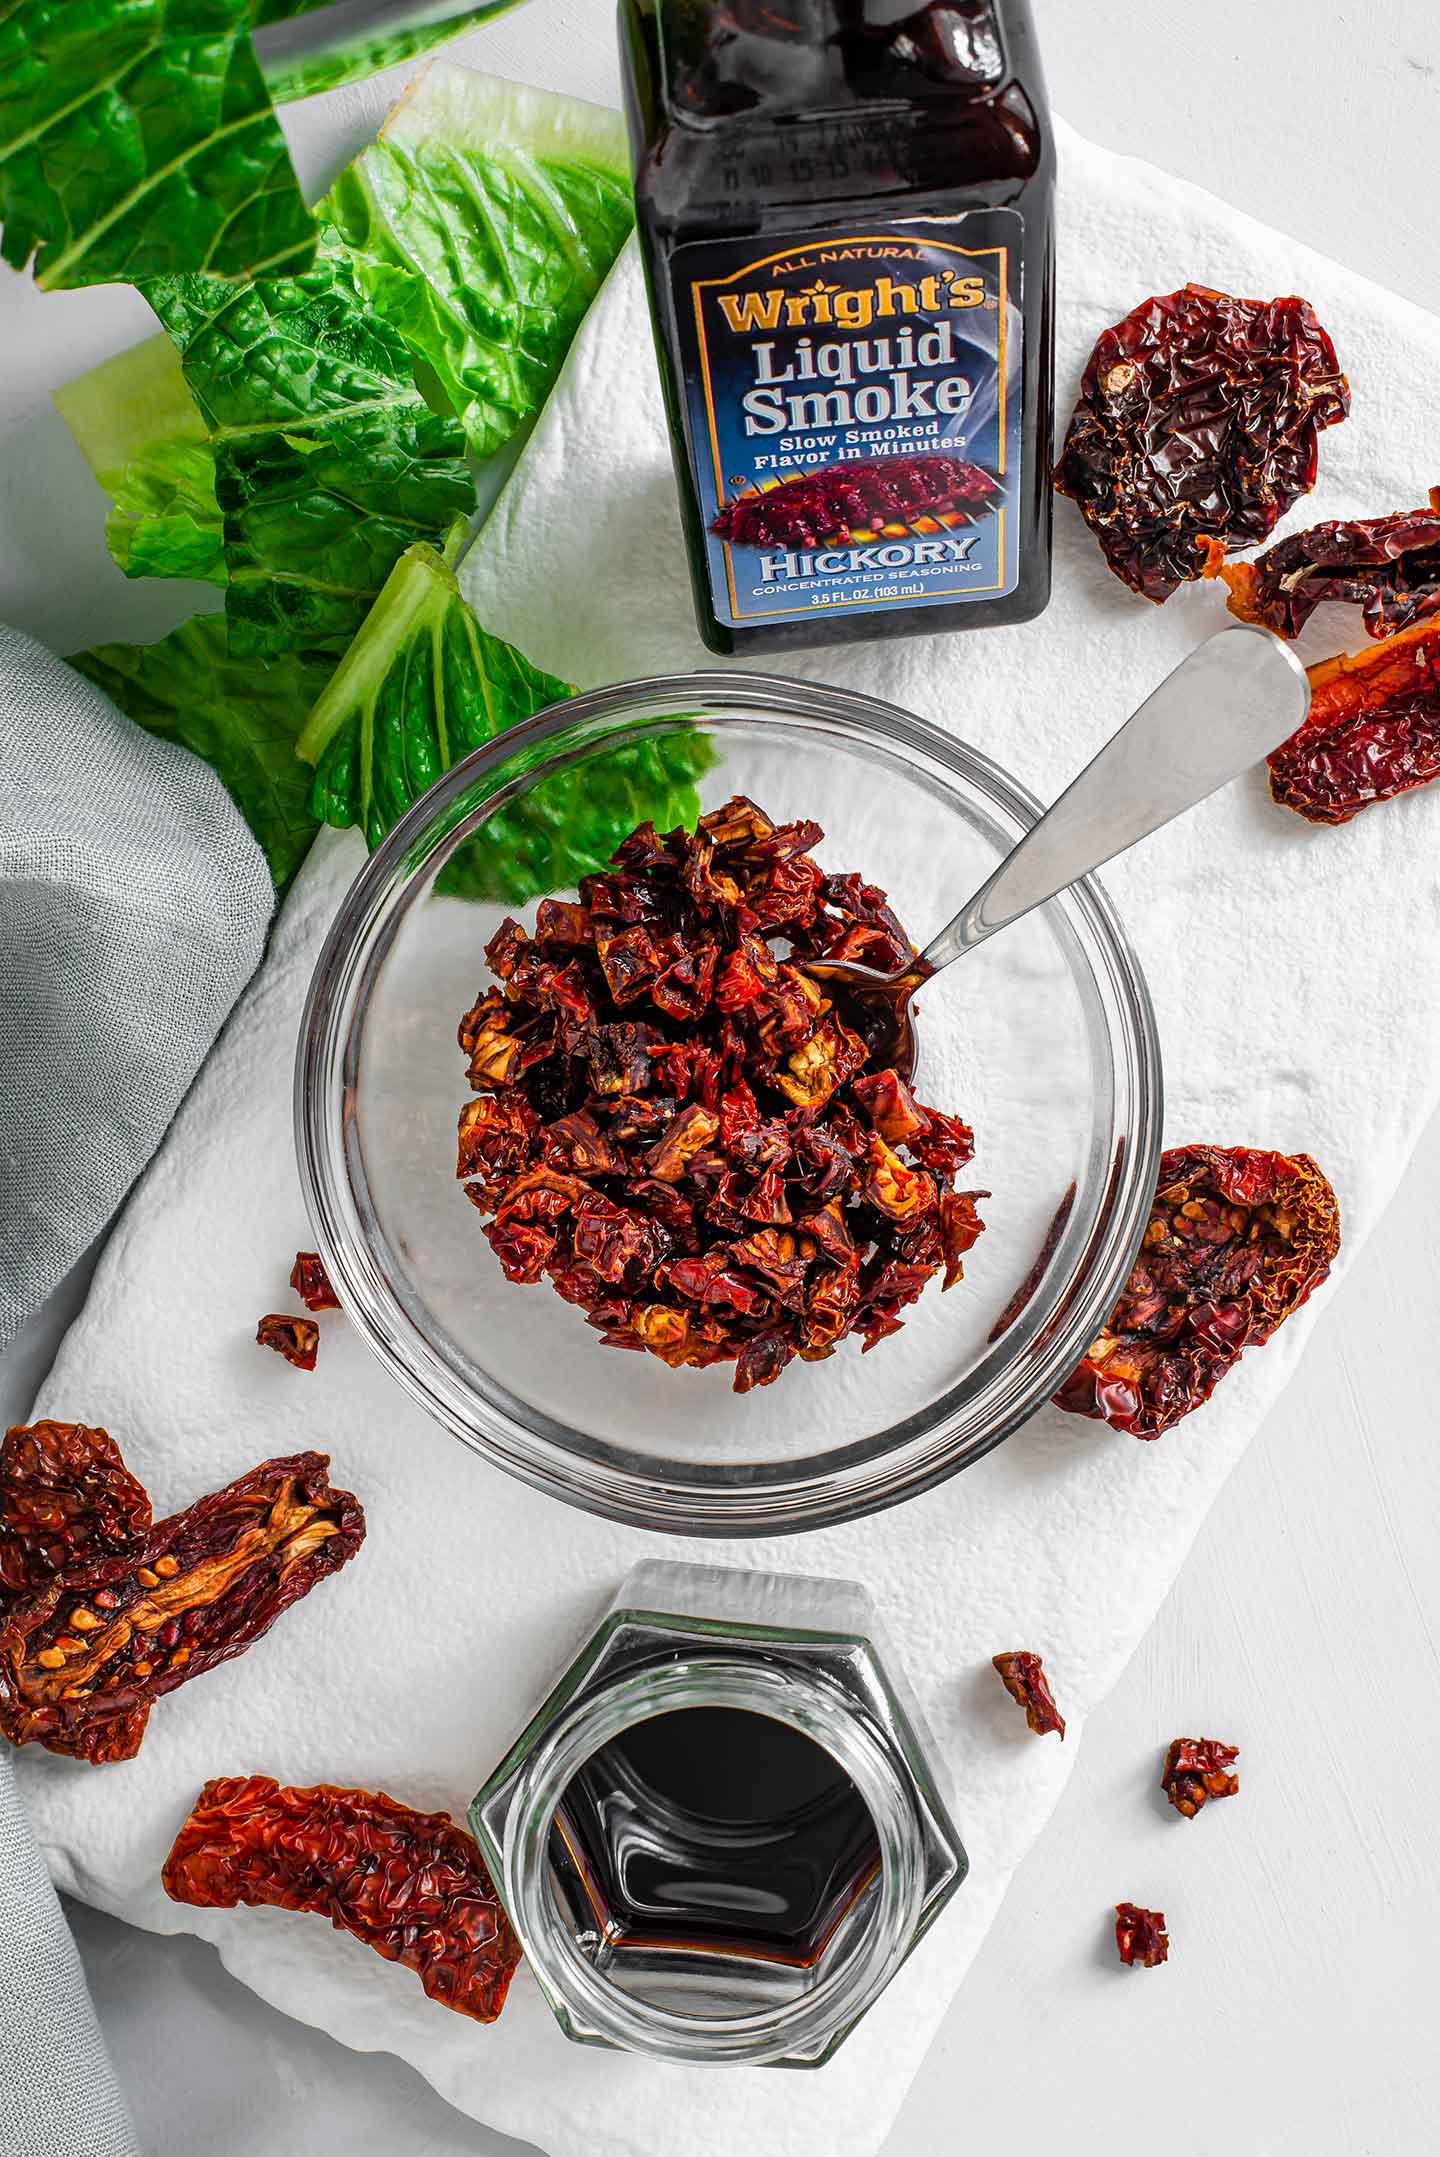 Top down view of sun-dried tomato bits in a small glass bowl with a bottle of liquid smoke, a jar of tamari, and scattered sun-dried tomato slices on a white tray.